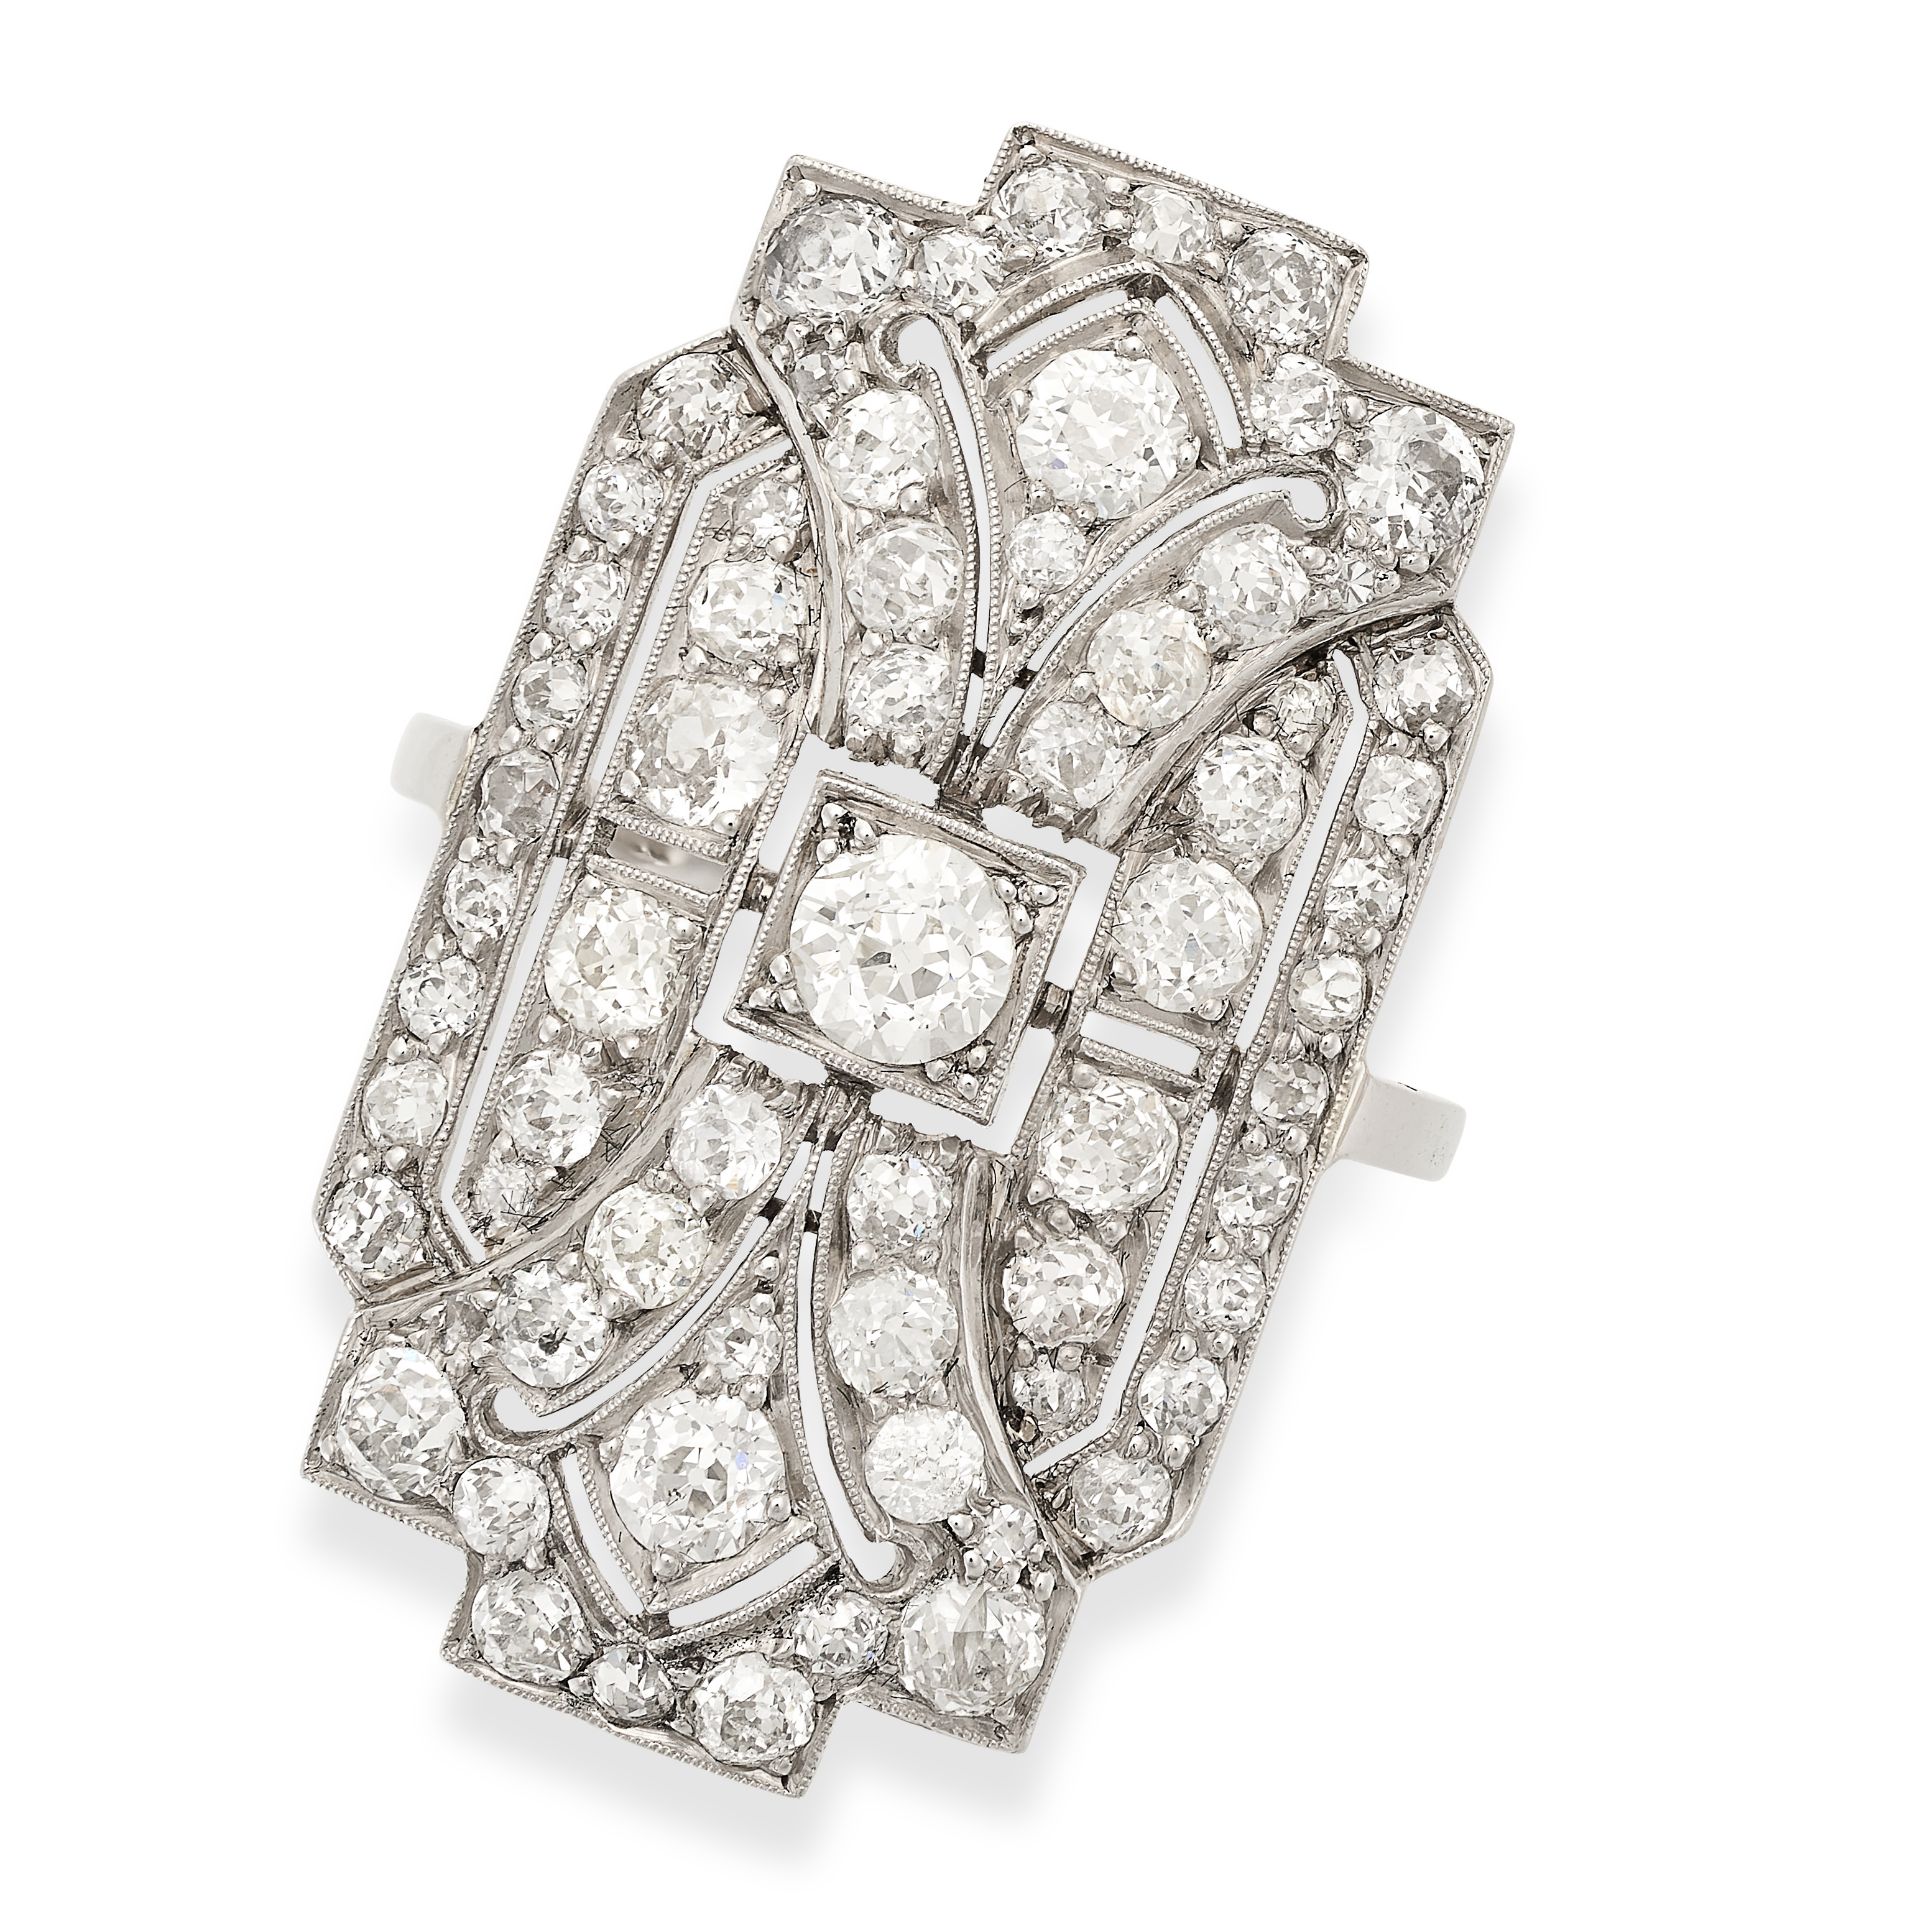 AN ANTIQUE DIAMOND PLAQUE RING in platinum, set with old cut diamonds totalling 2.0-2.2 carats, H.